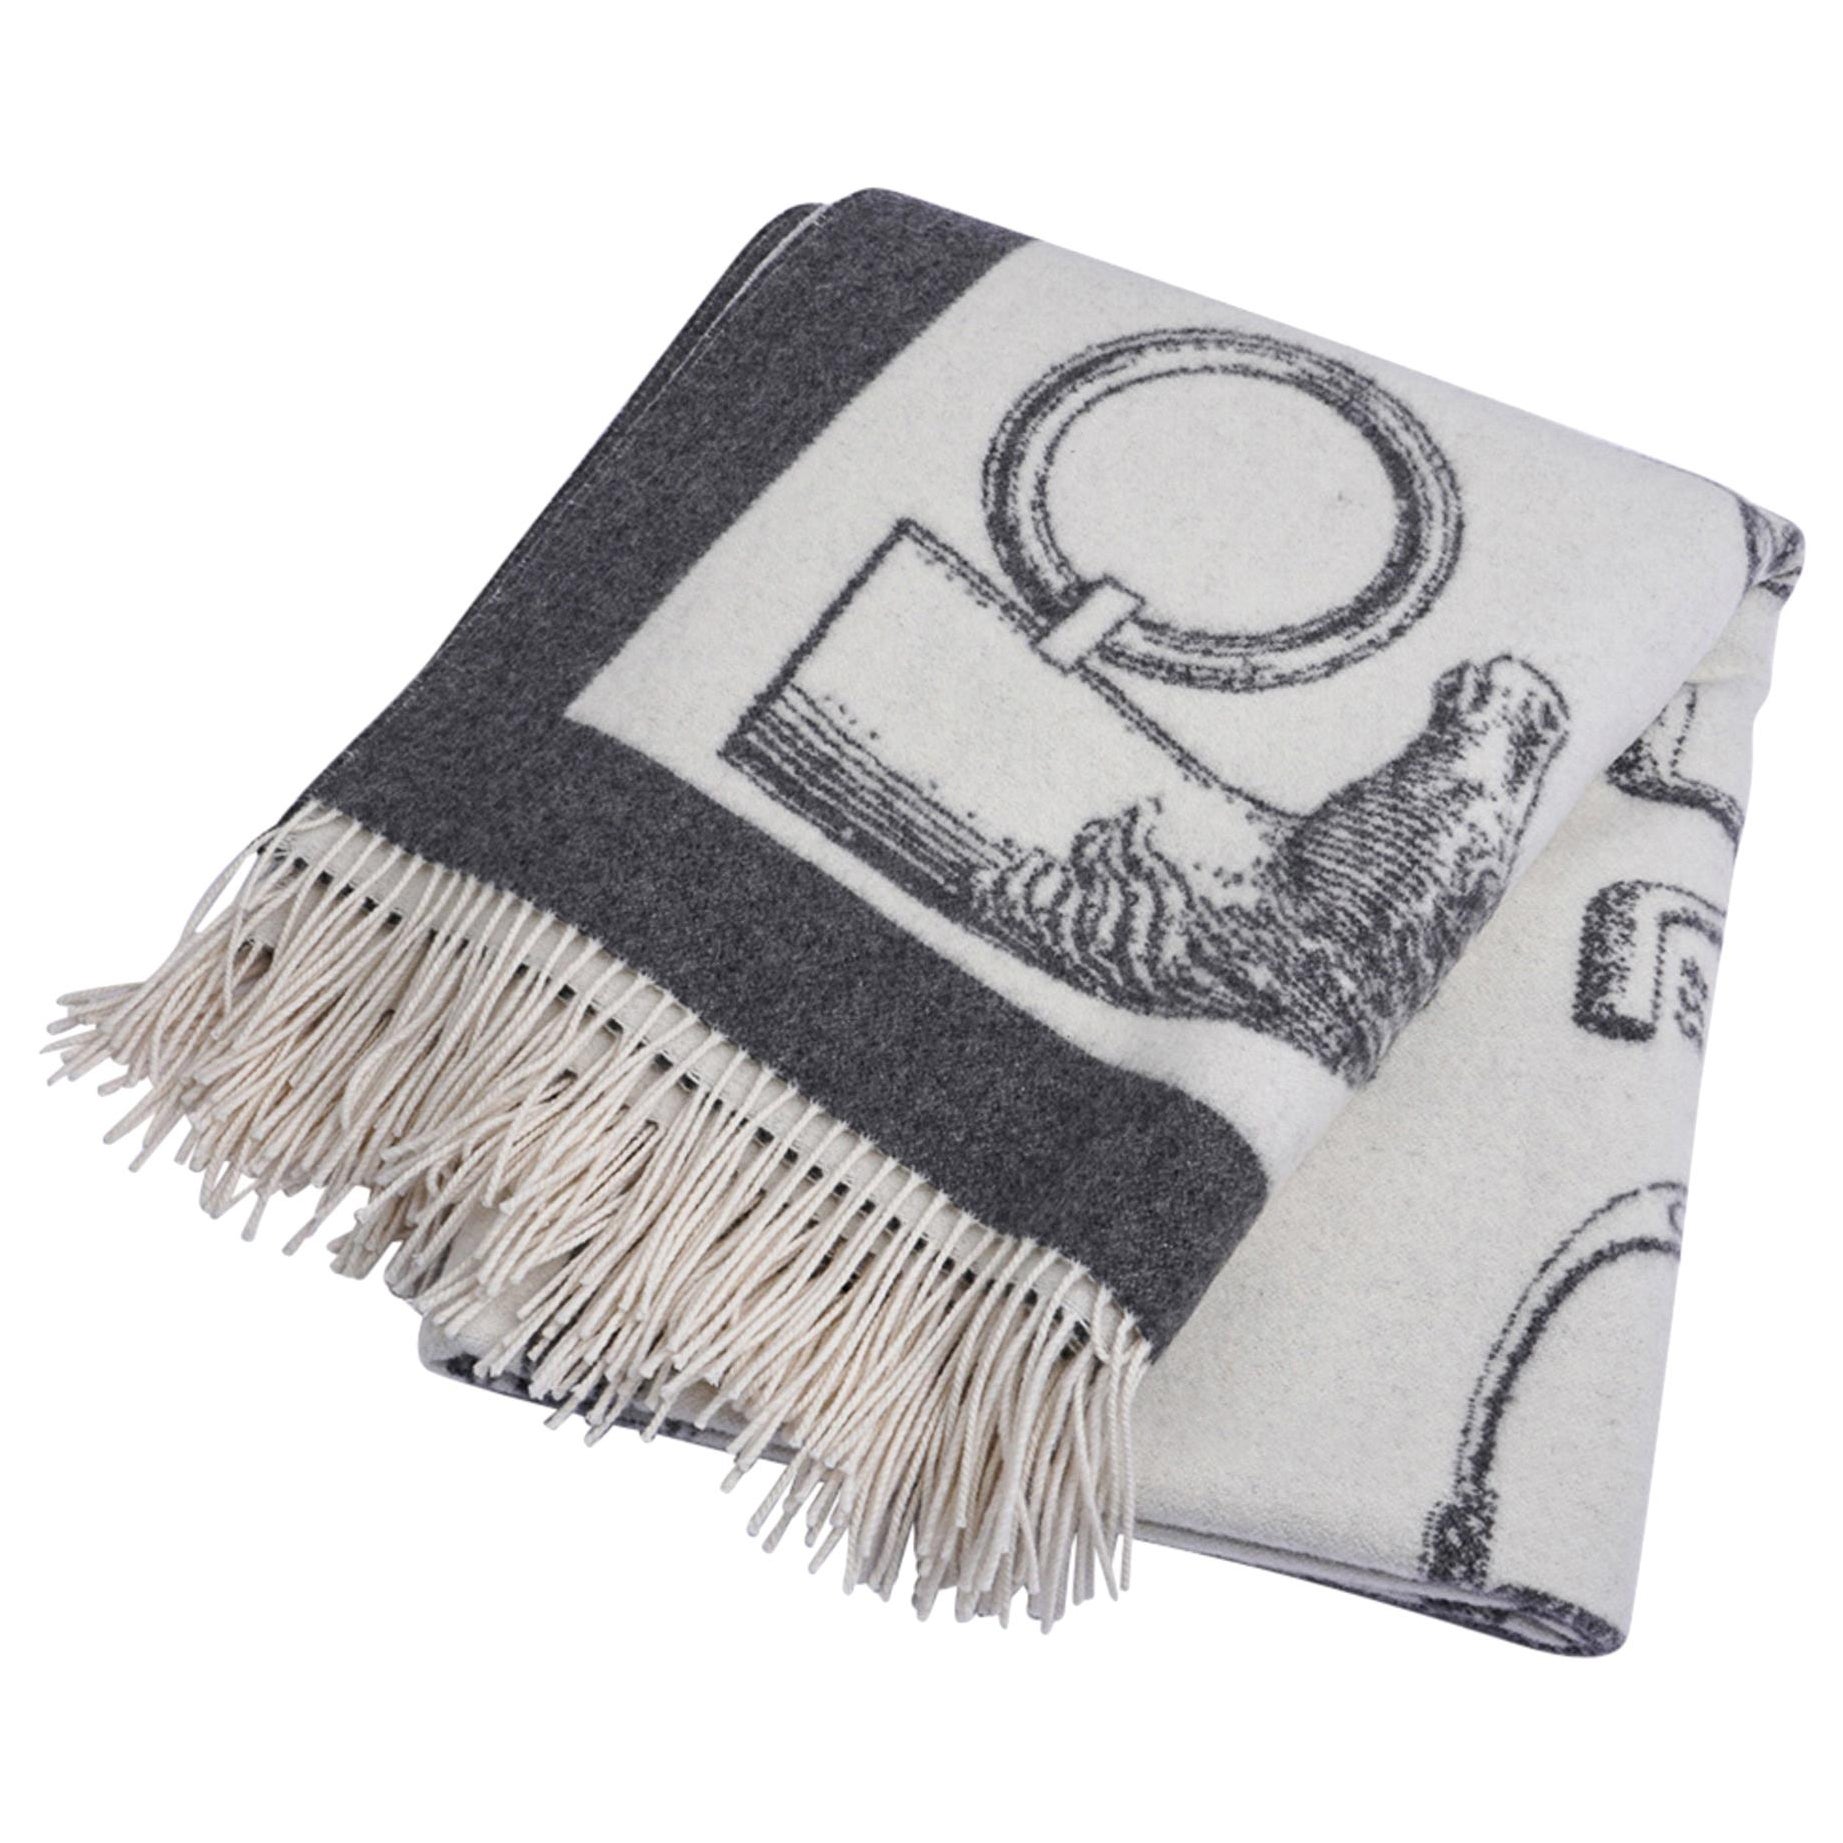 Hermes Blanket Metalleries Equestrian Throw Gris / Ecru Limited Edition New For Sale